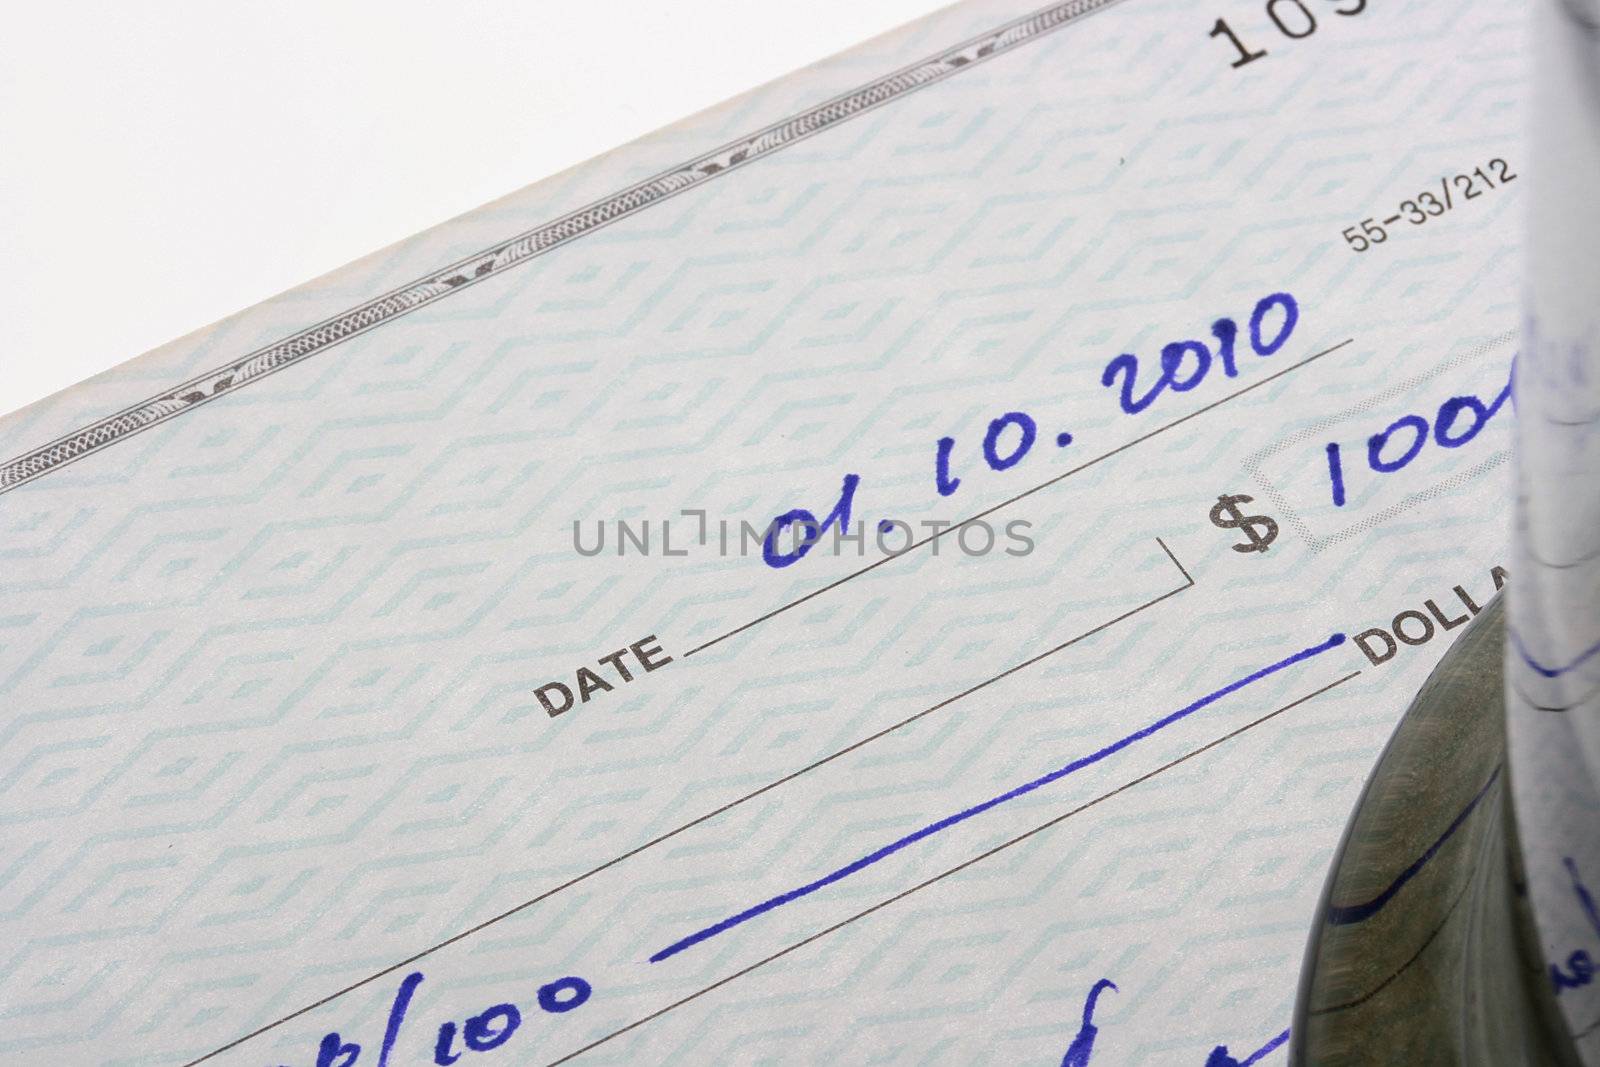 The check for payment with a shooting foreshortening for the sum and date.